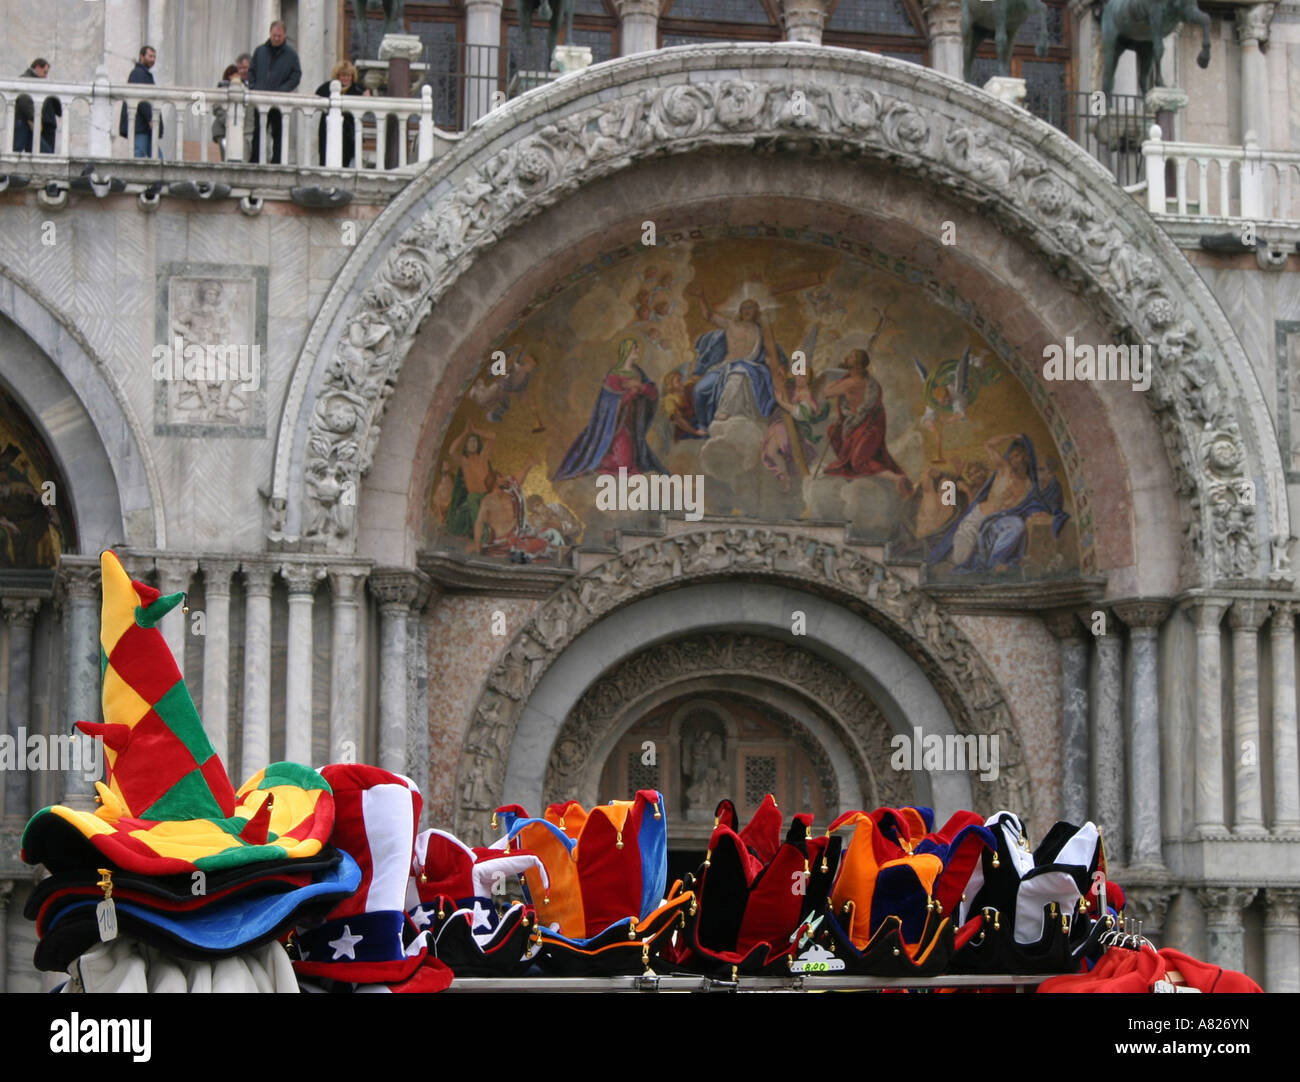 Hat stall in front of entrance to St Marks Cathedral, Venice, Italy Stock Photo